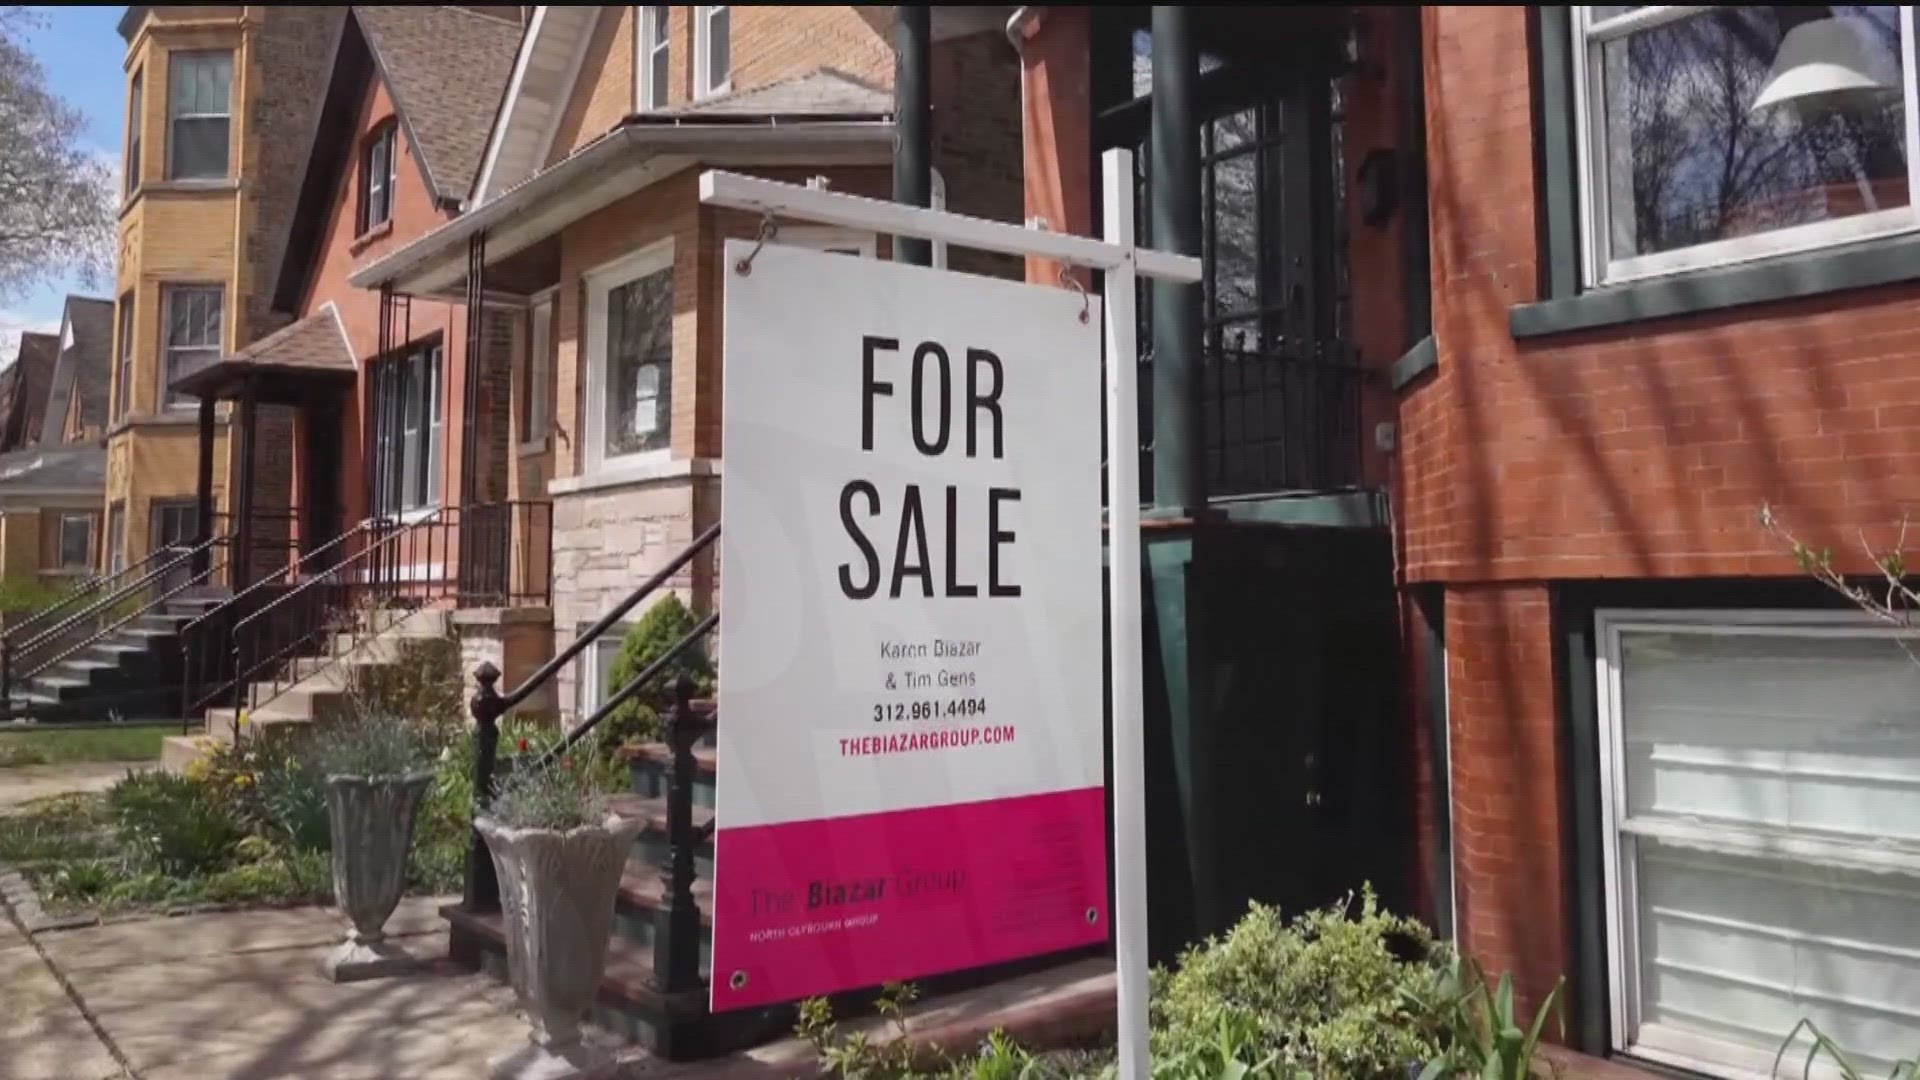 The way we buy and sell homes could change if a federal judge approves a settlement.